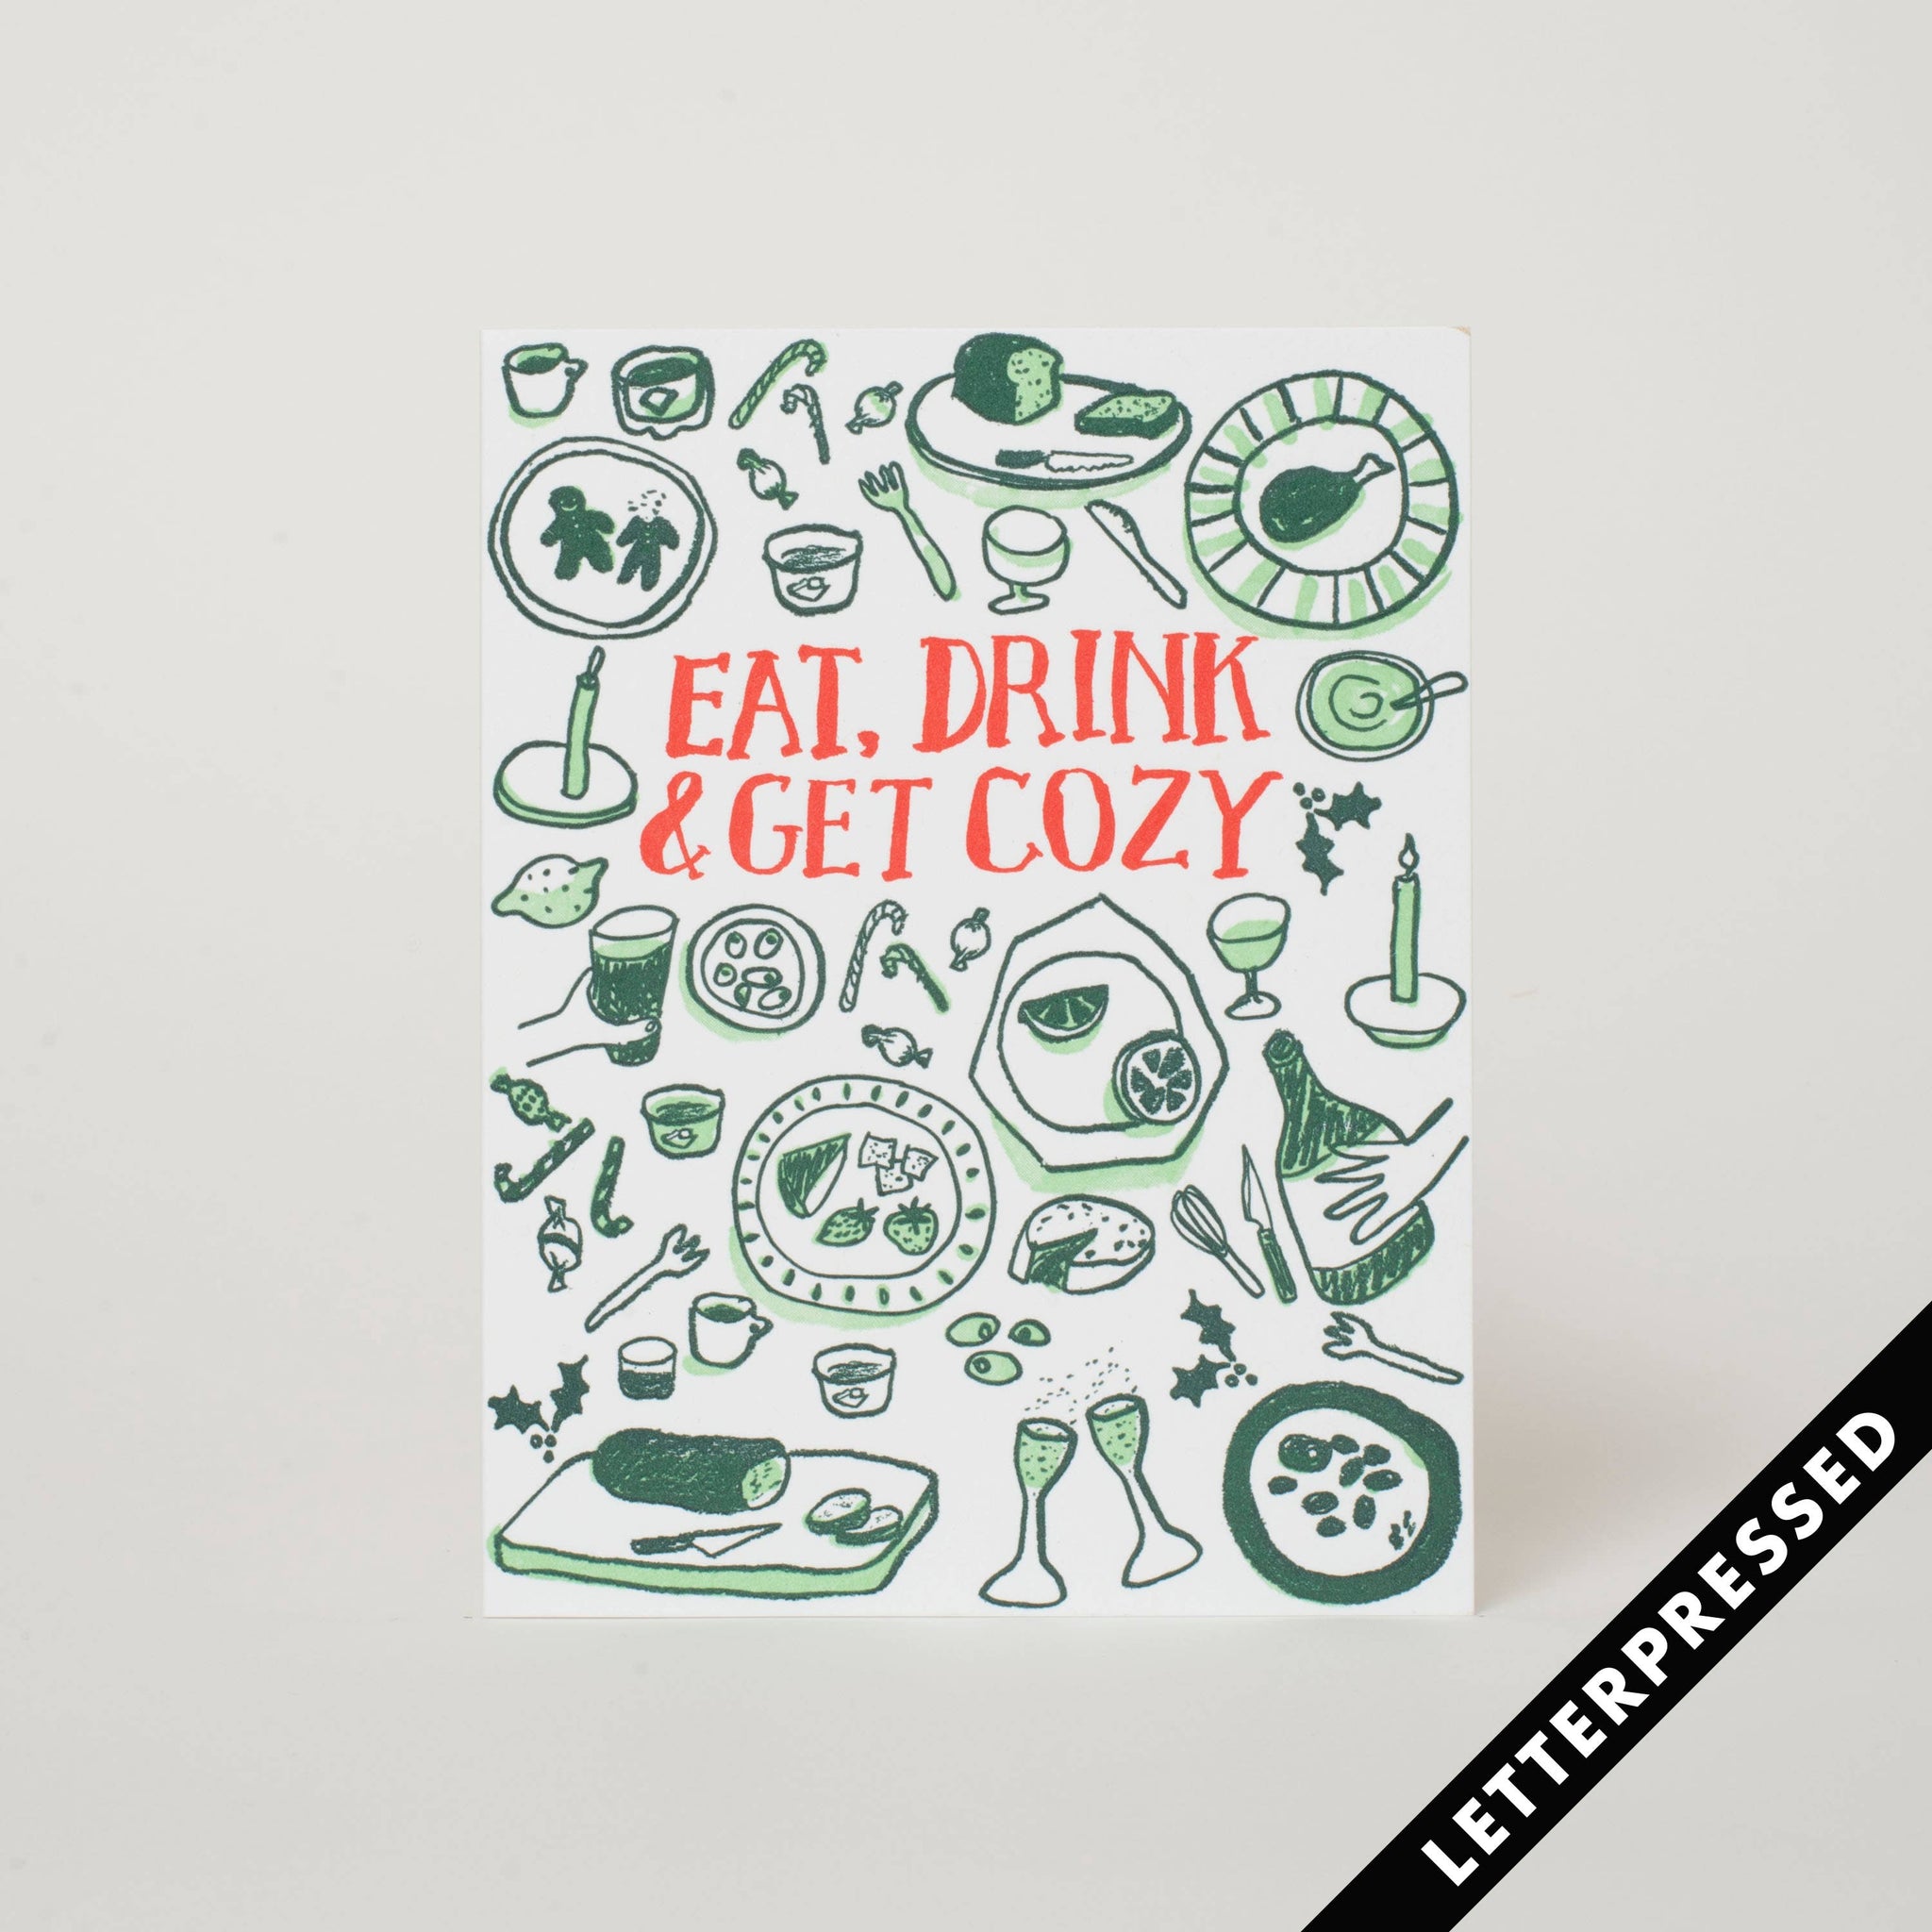 "Eat, Drink & Get Cozy" Greeting Card